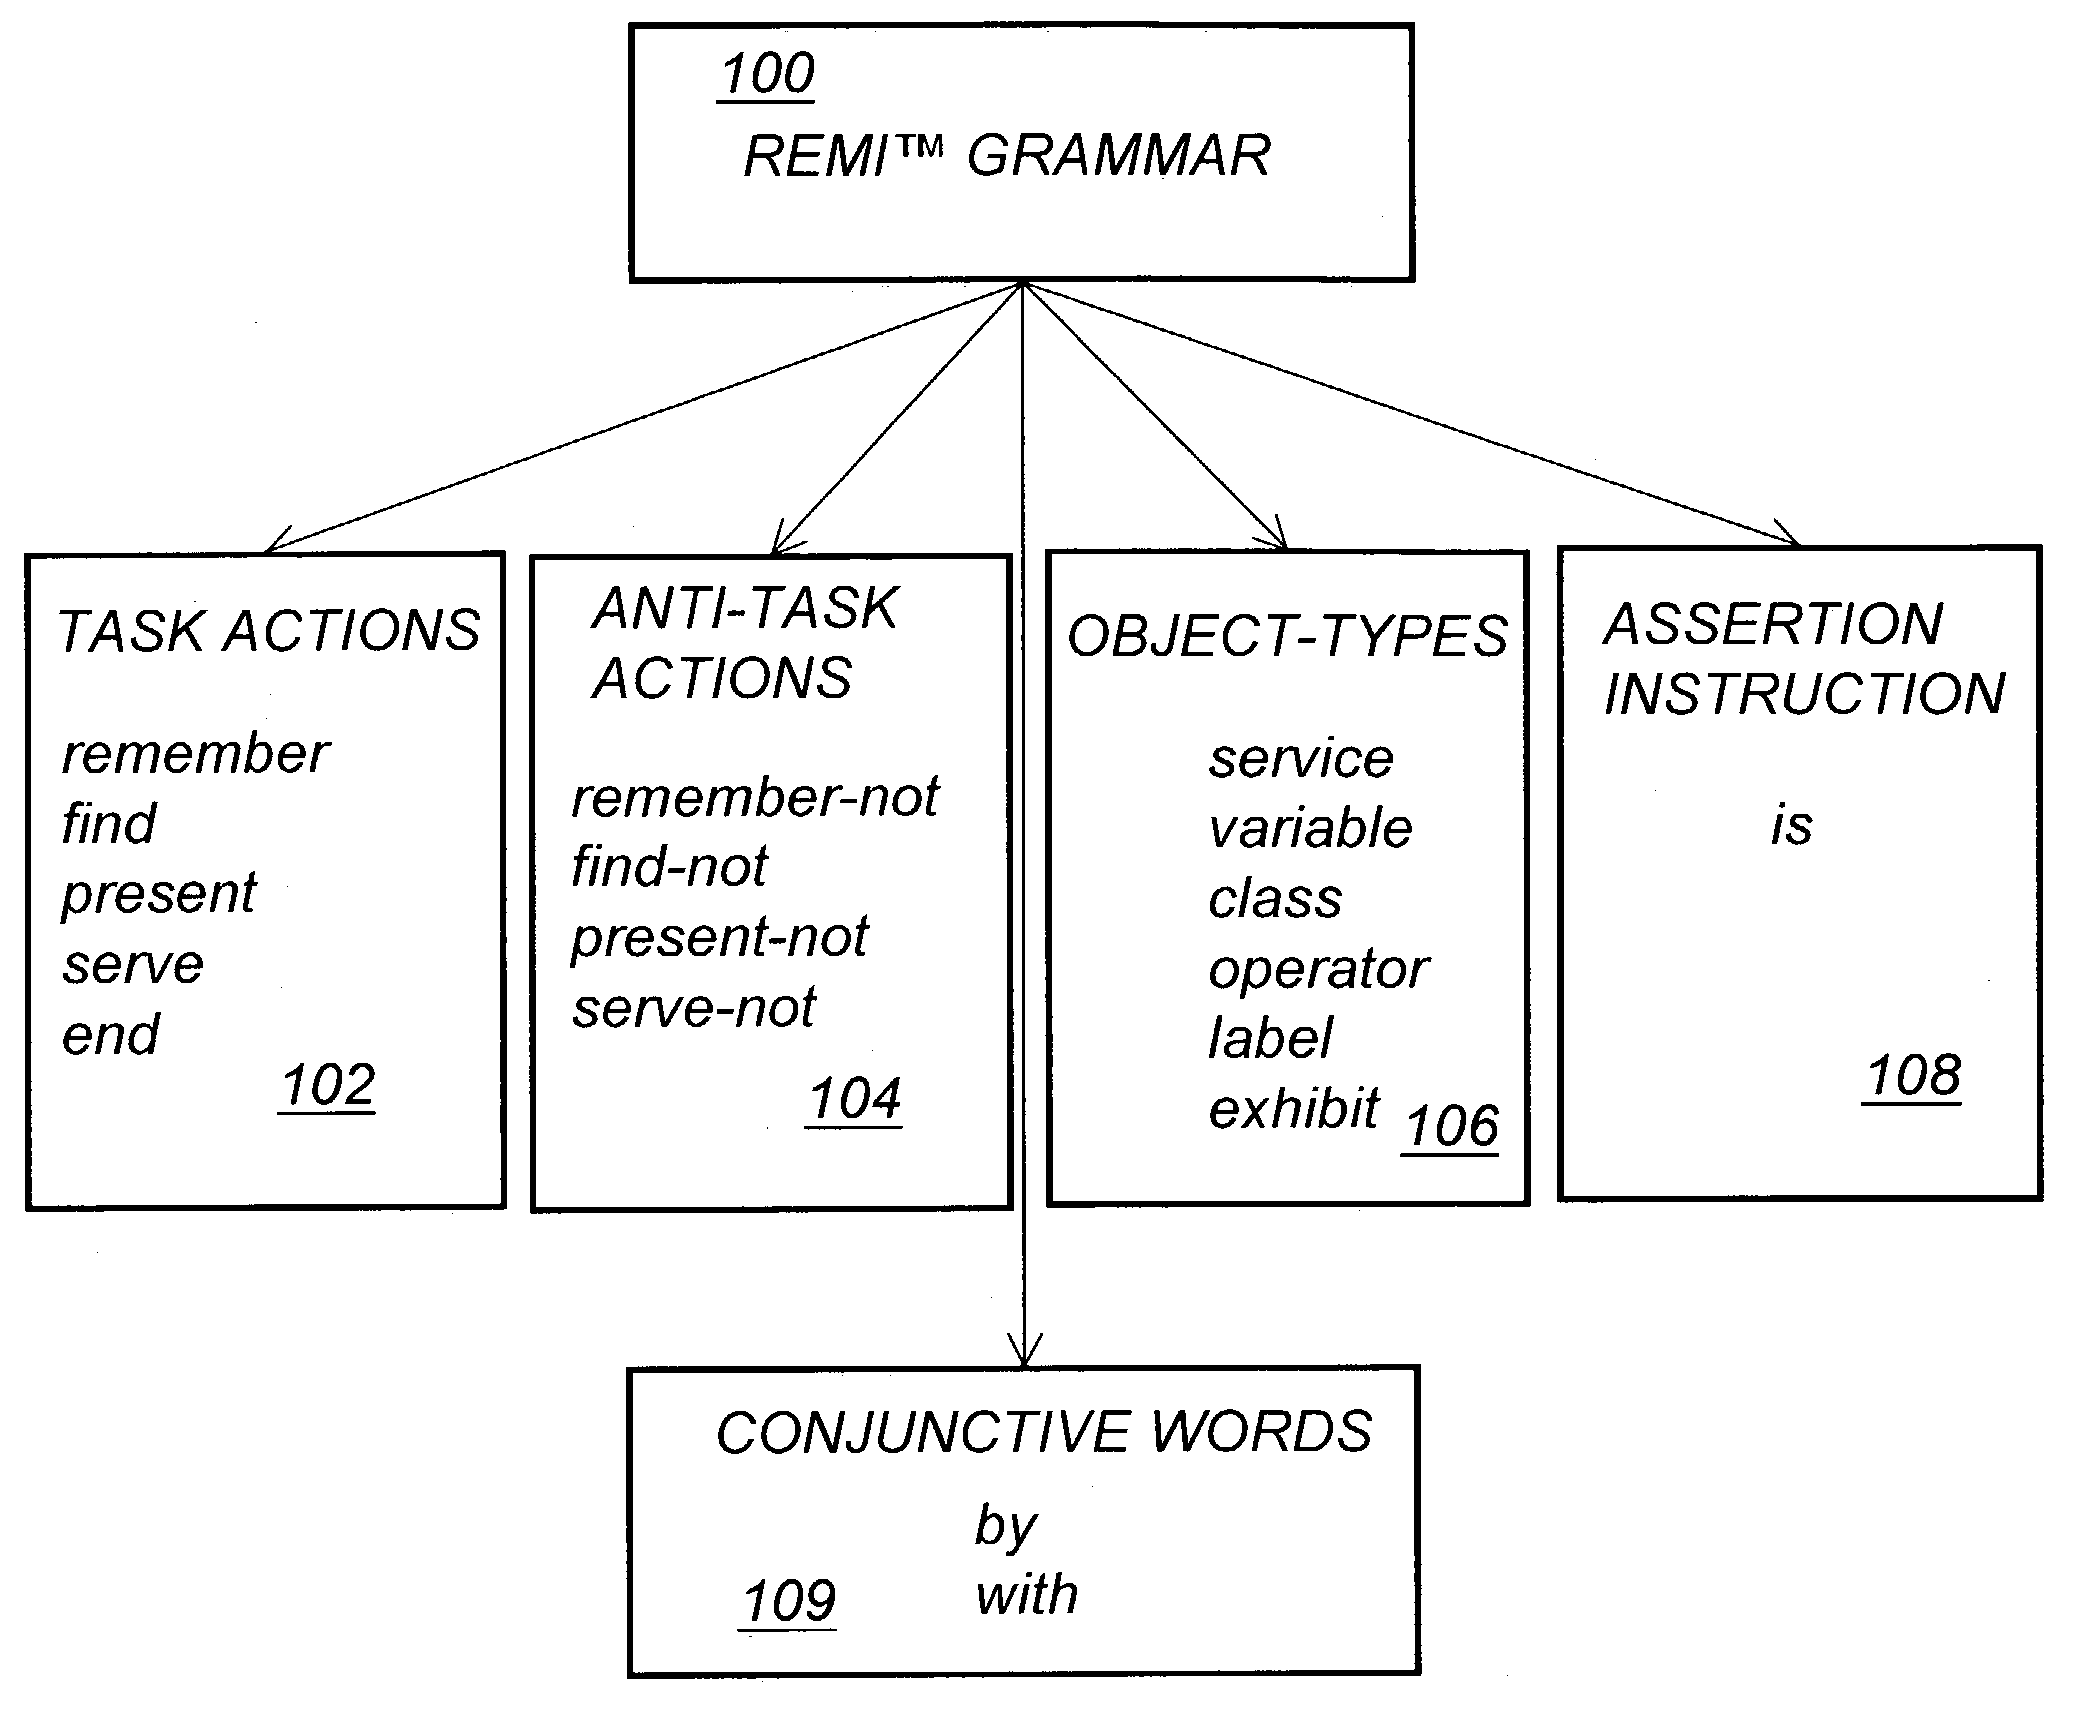 Requirement-centric extensible multilingual instruction language with anti-task actions for computer programming